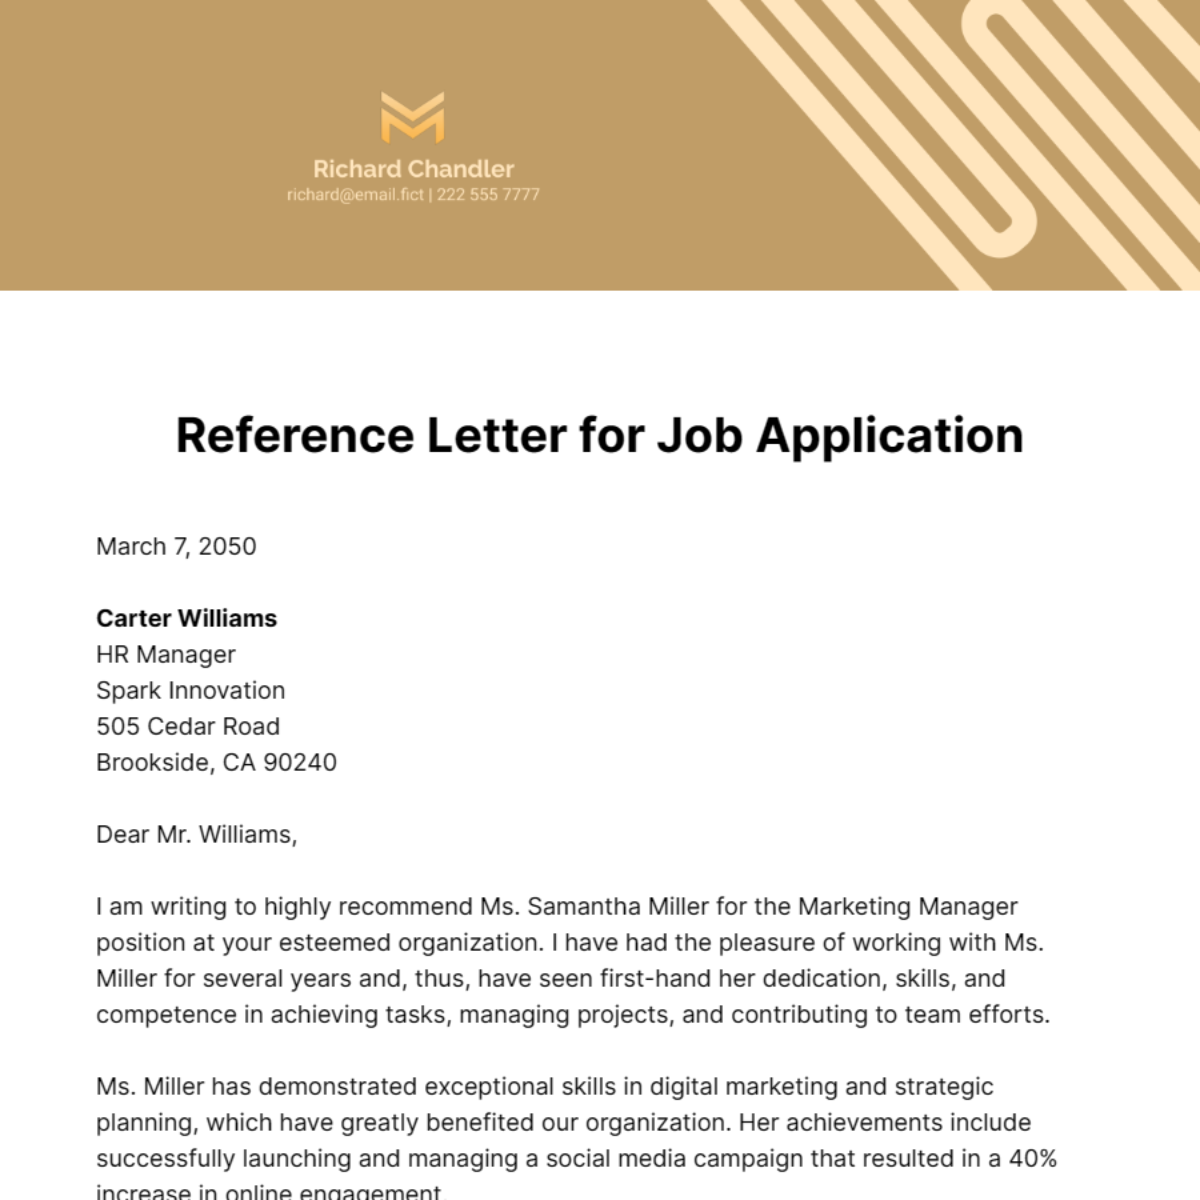 Reference Letter for Job Application Template